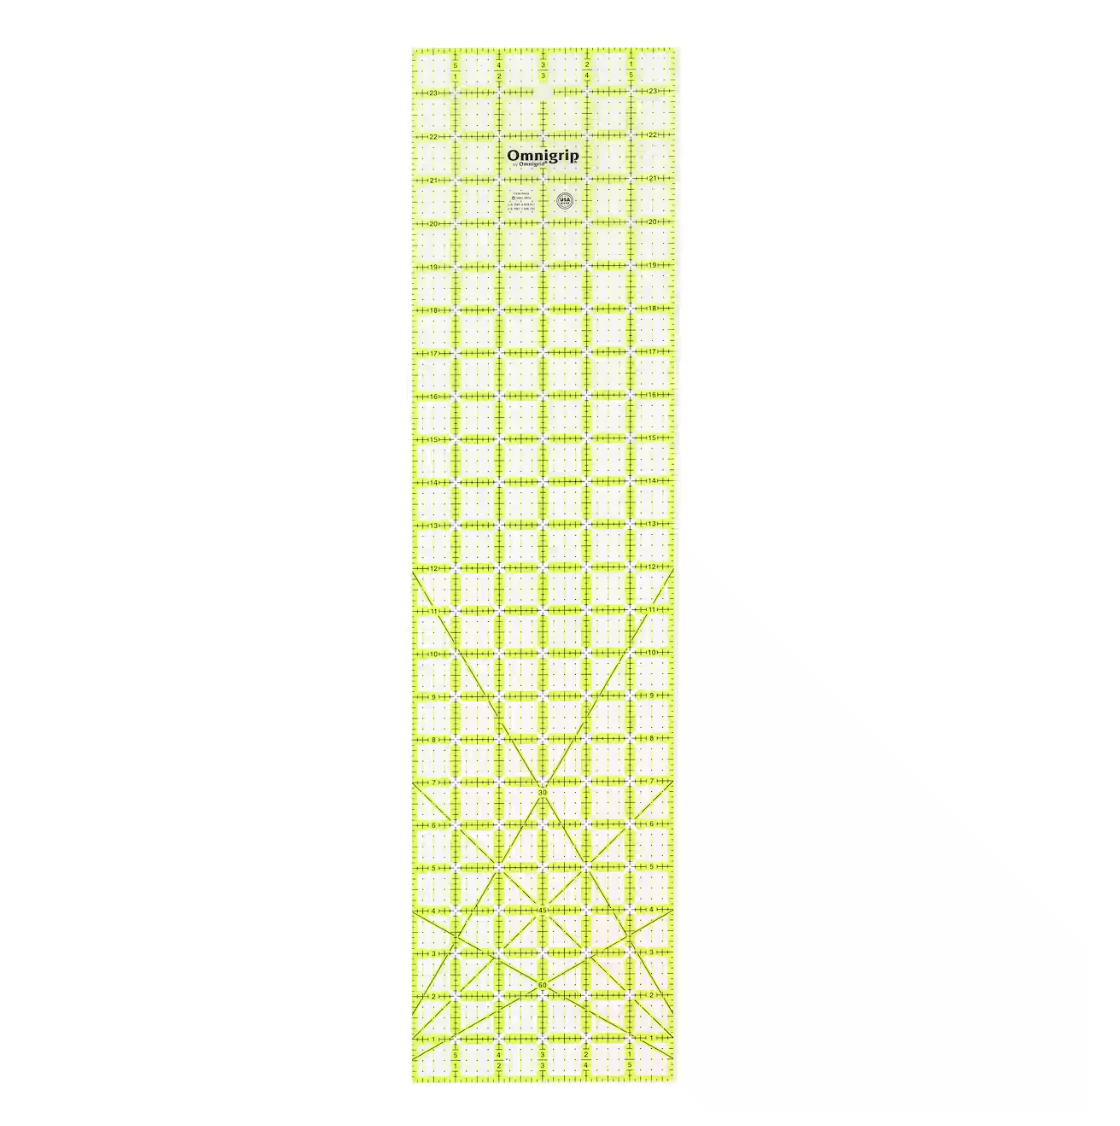 6.5 x 24 Inch Non-slip Quilting Ruler